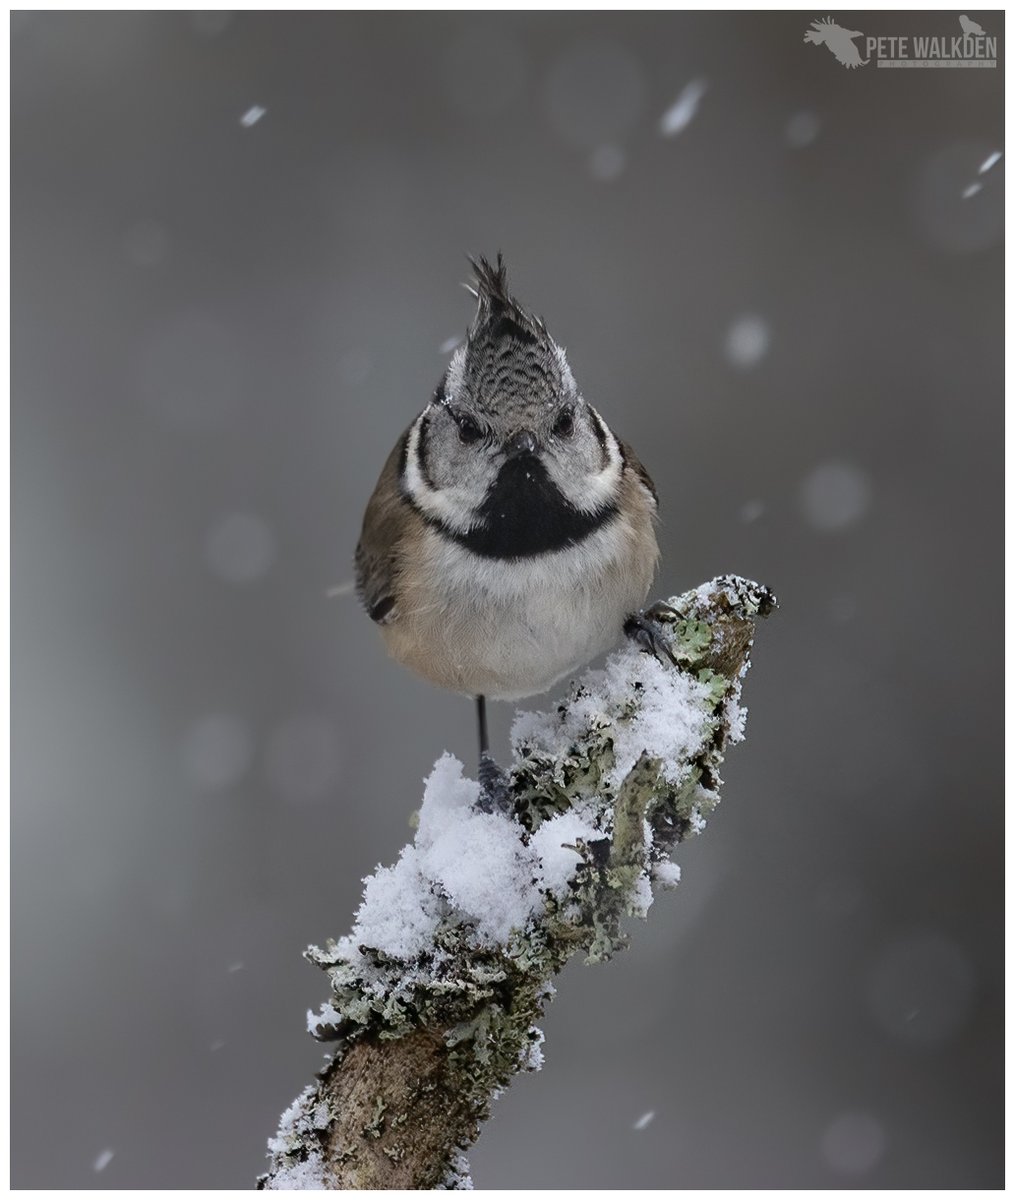 Crested Tit - with snow falling, I had to visit the woodland again. Magical. #crestedtit #naturelovers #winterwatch #birdphotography #BirdsSeenIn2024 #highlands #scotland #snow